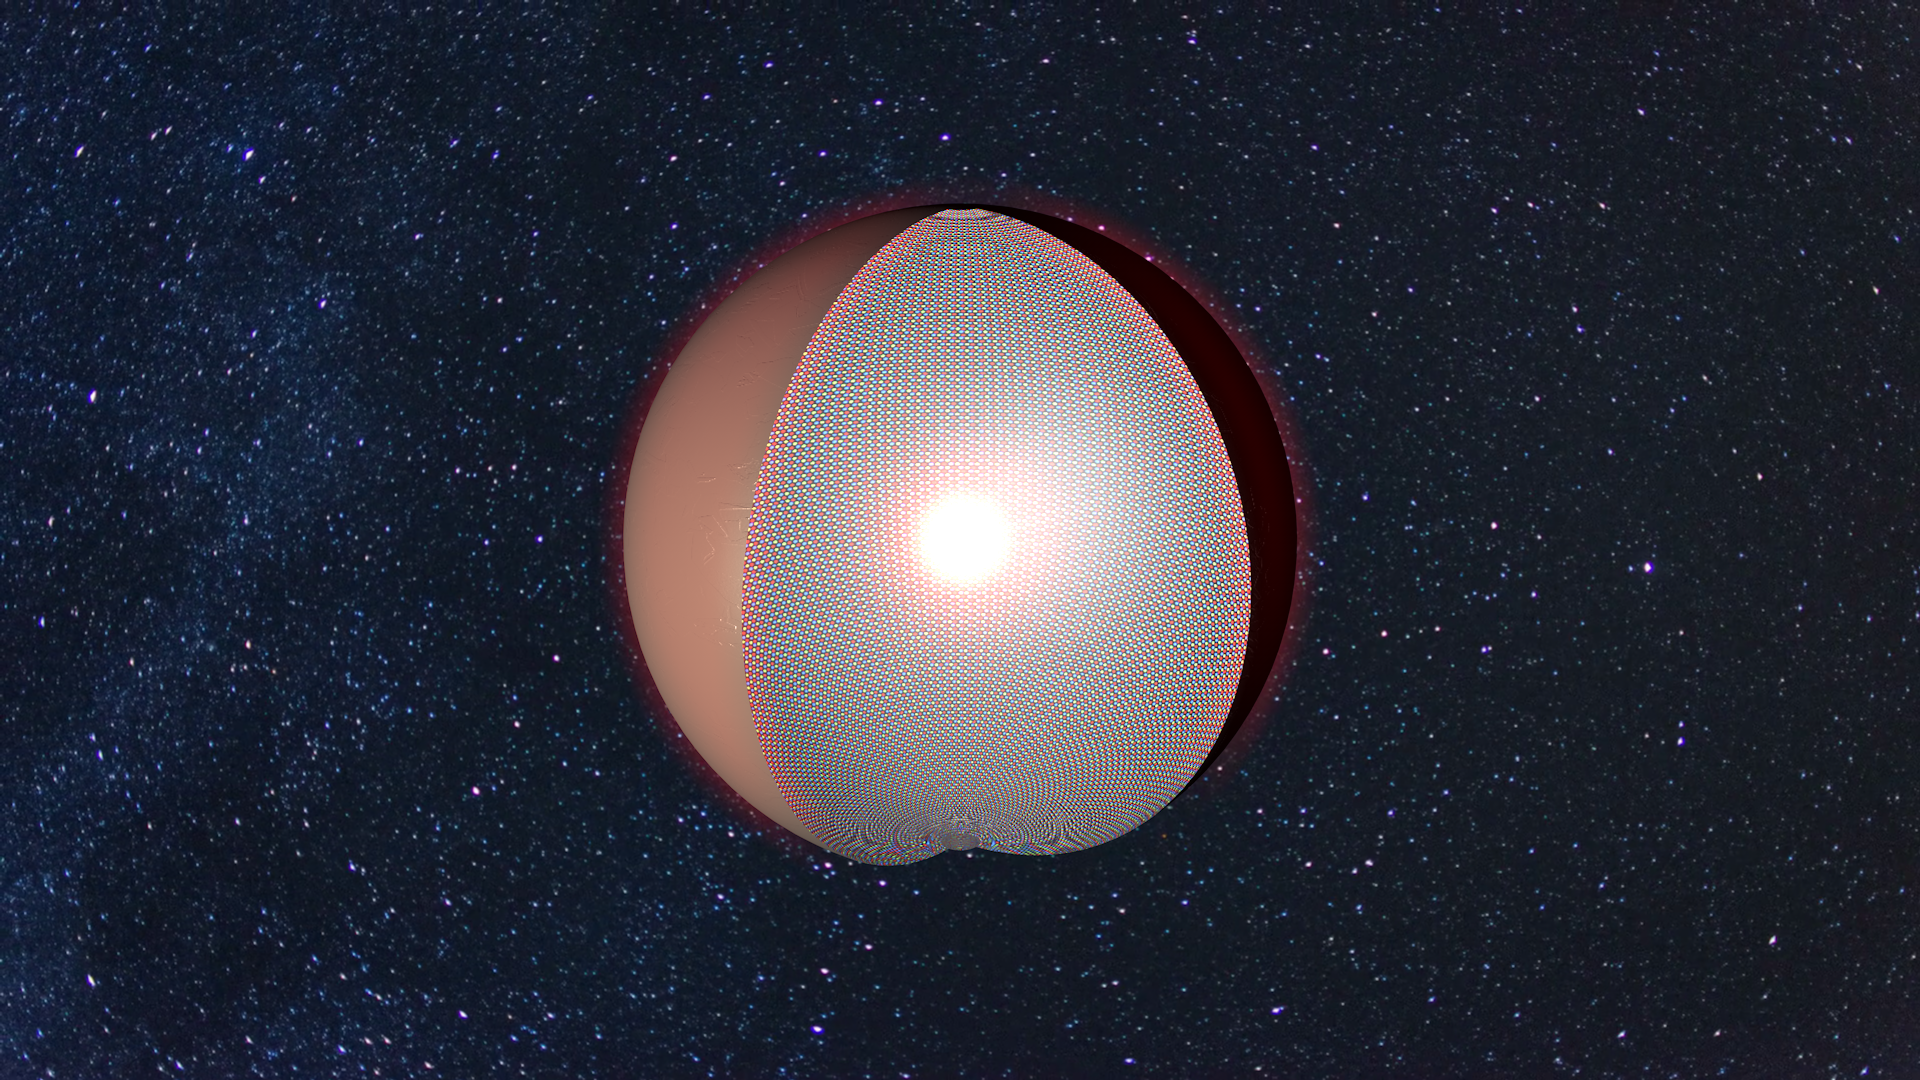  Could aliens be living inside a Dyson sphere? https://commons.wikimedia.org/wiki/File:Dyson_sphere_in_cutaway.png